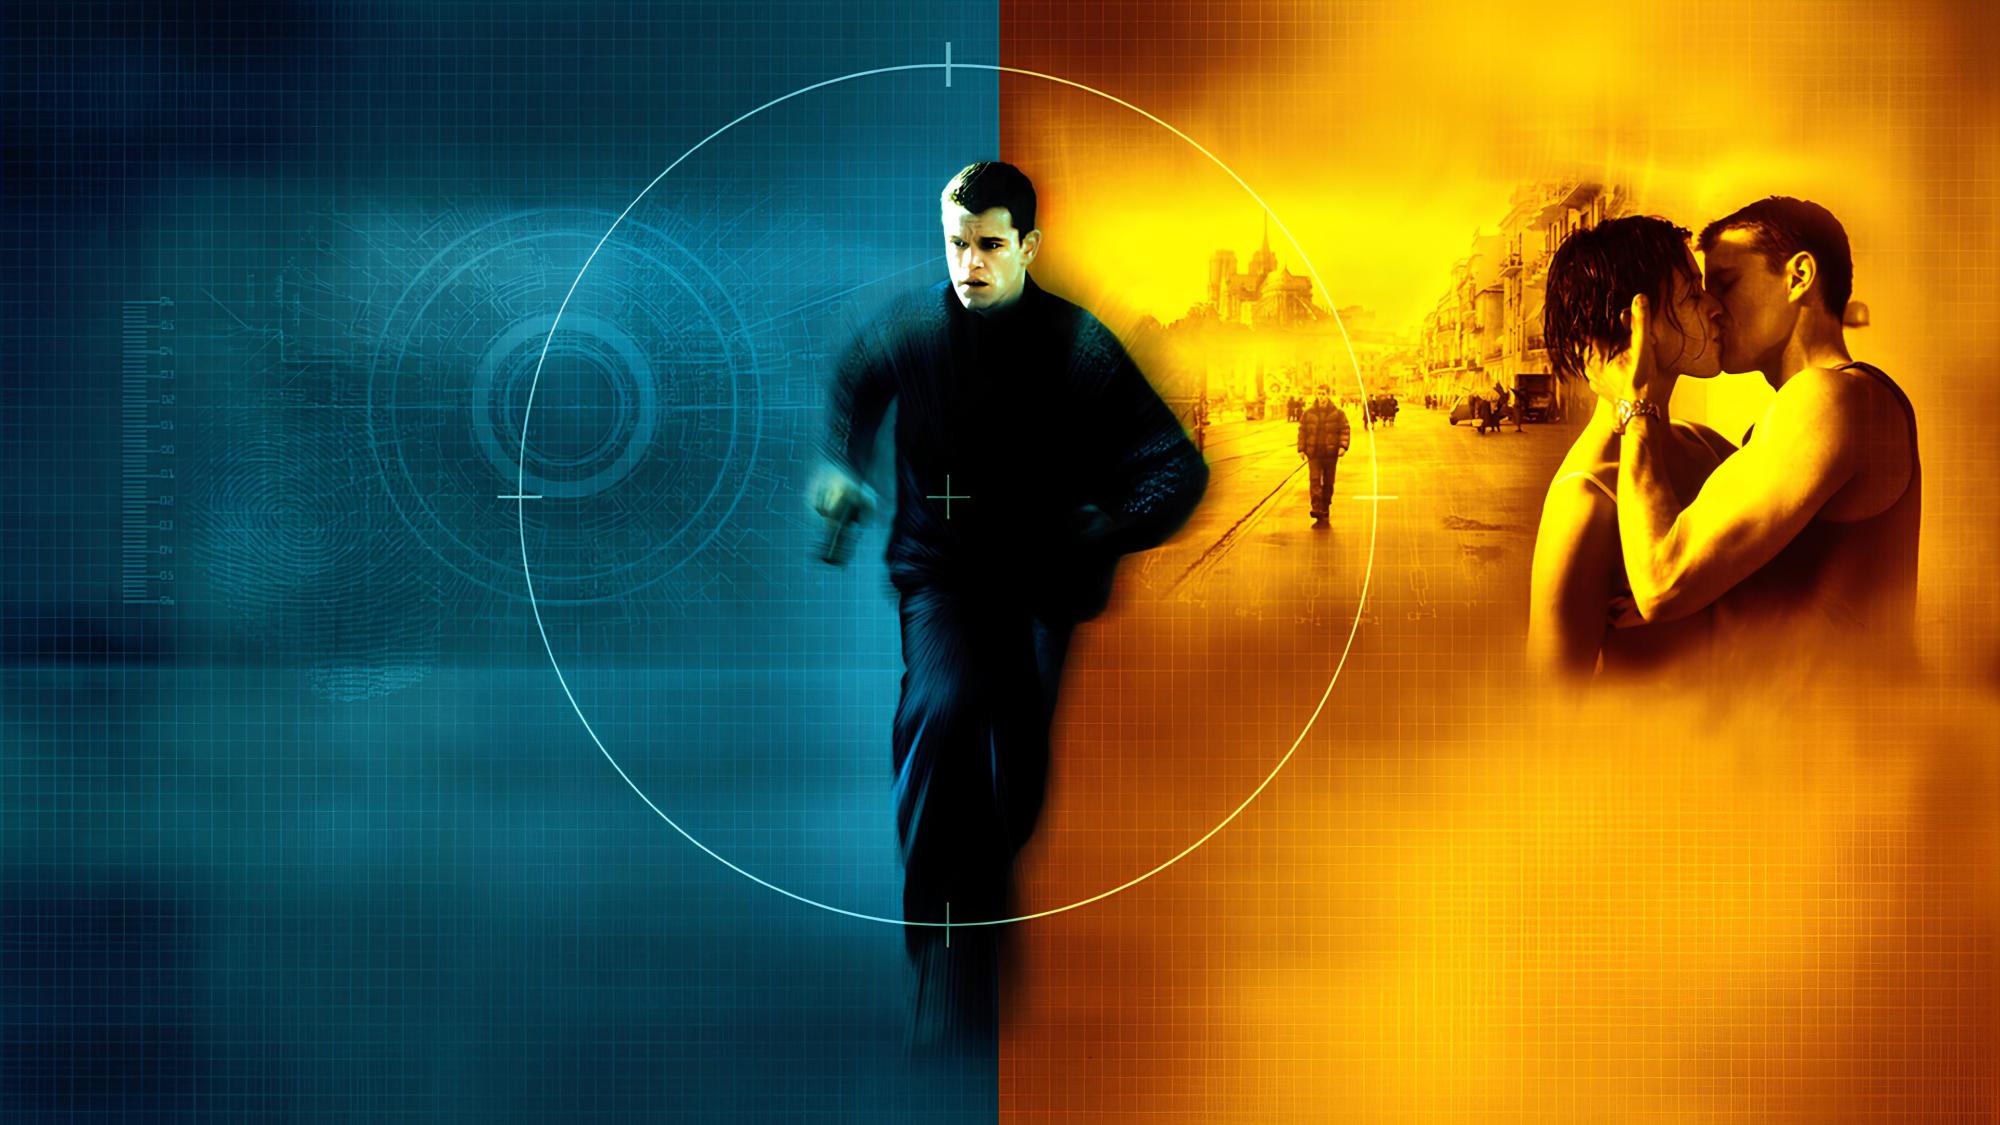 Backdrop Image for The Bourne Identity